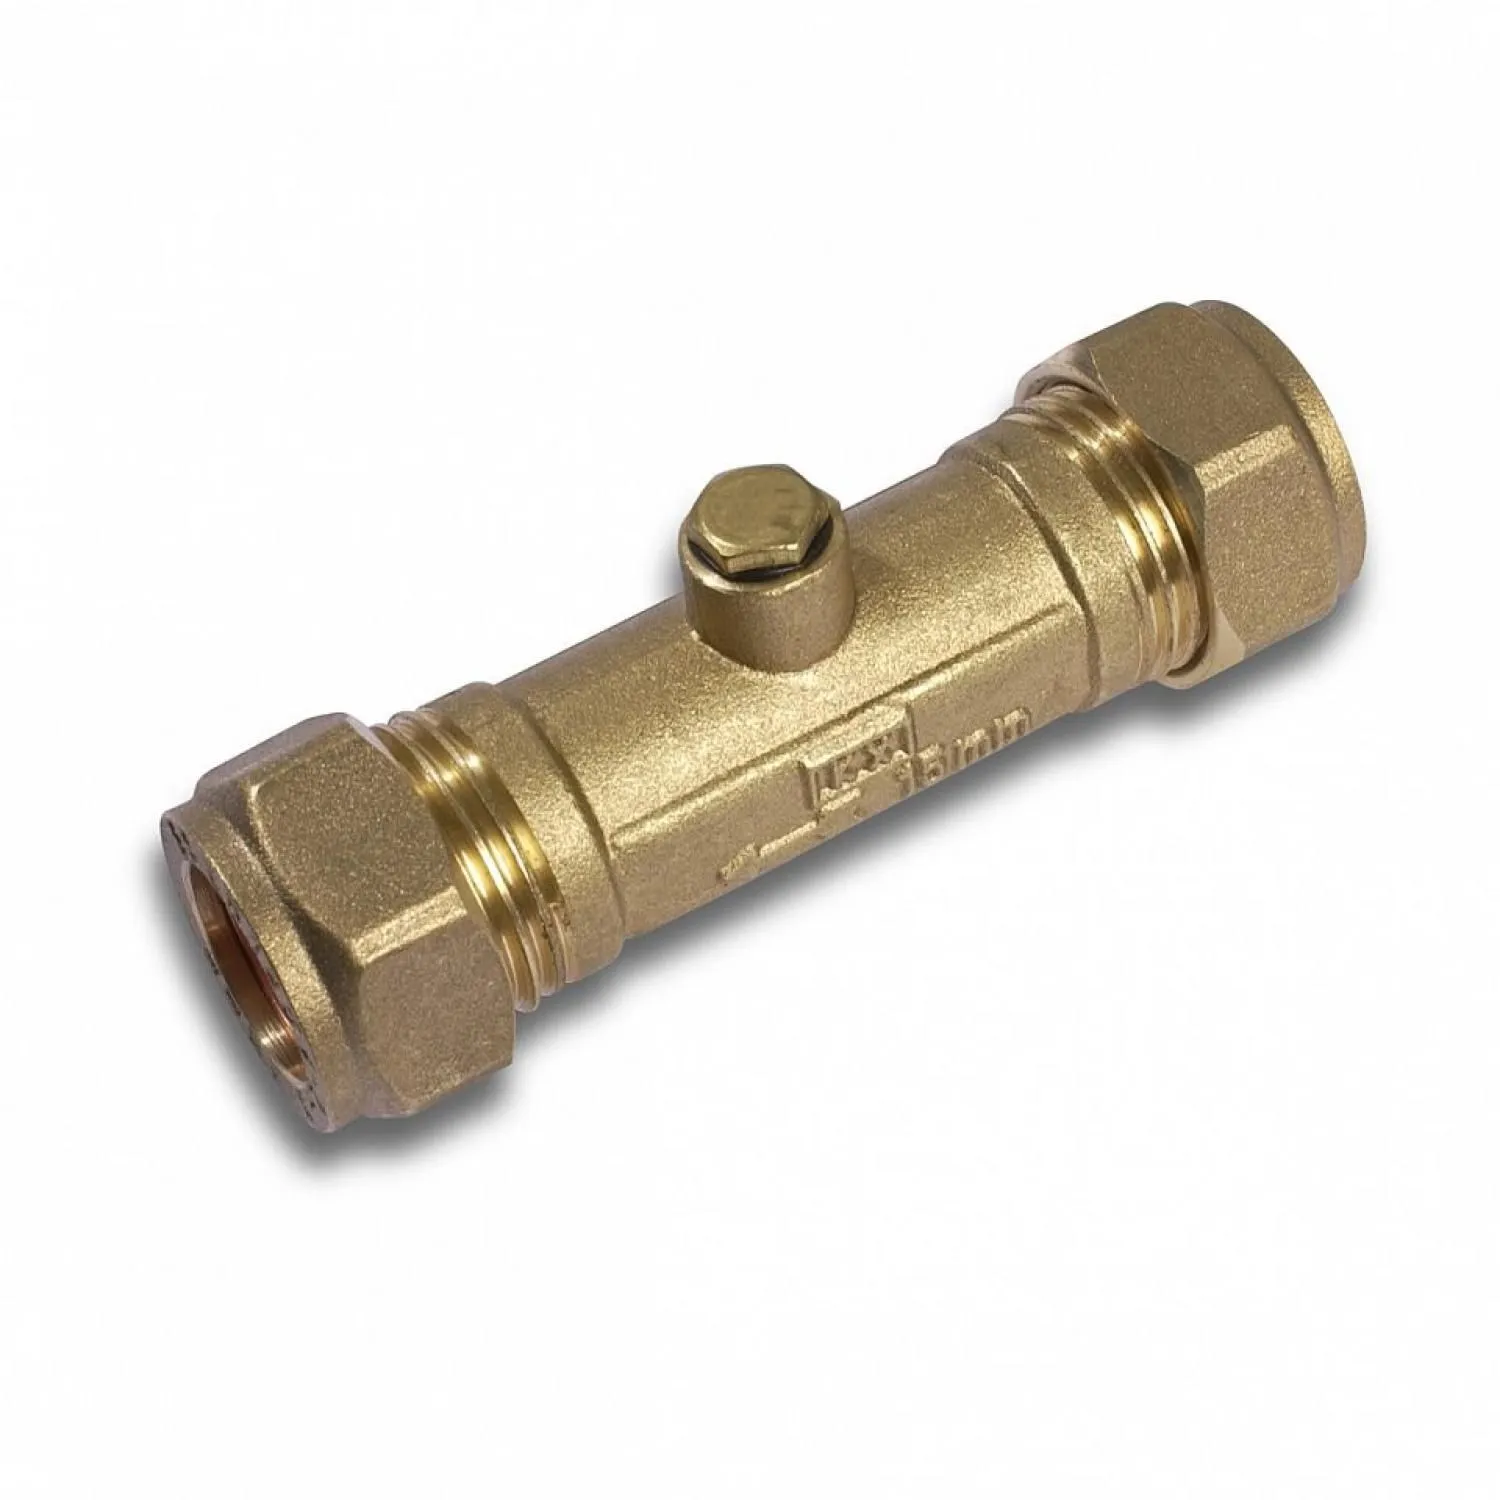 Double Check Valve 15mm CxC DZR WFBS Listed